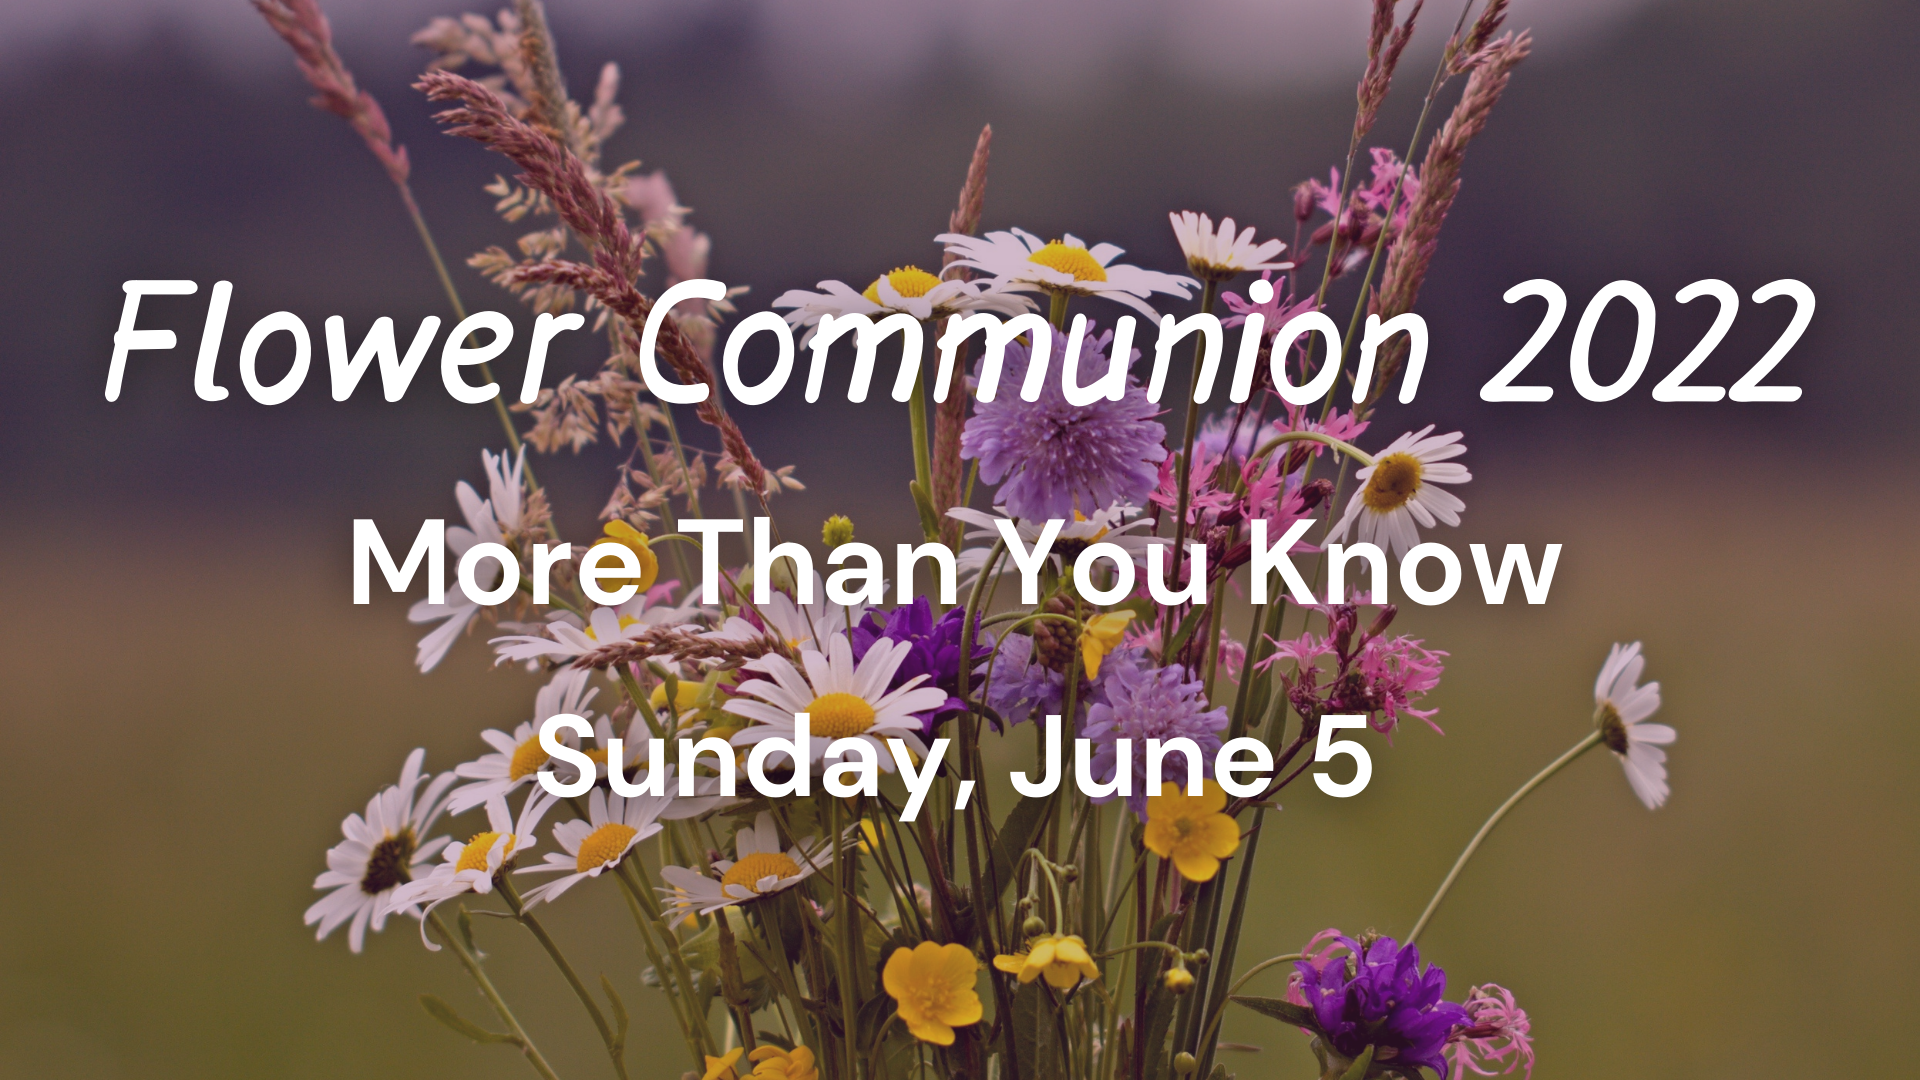 Flower Communion 2022: More Than You Know